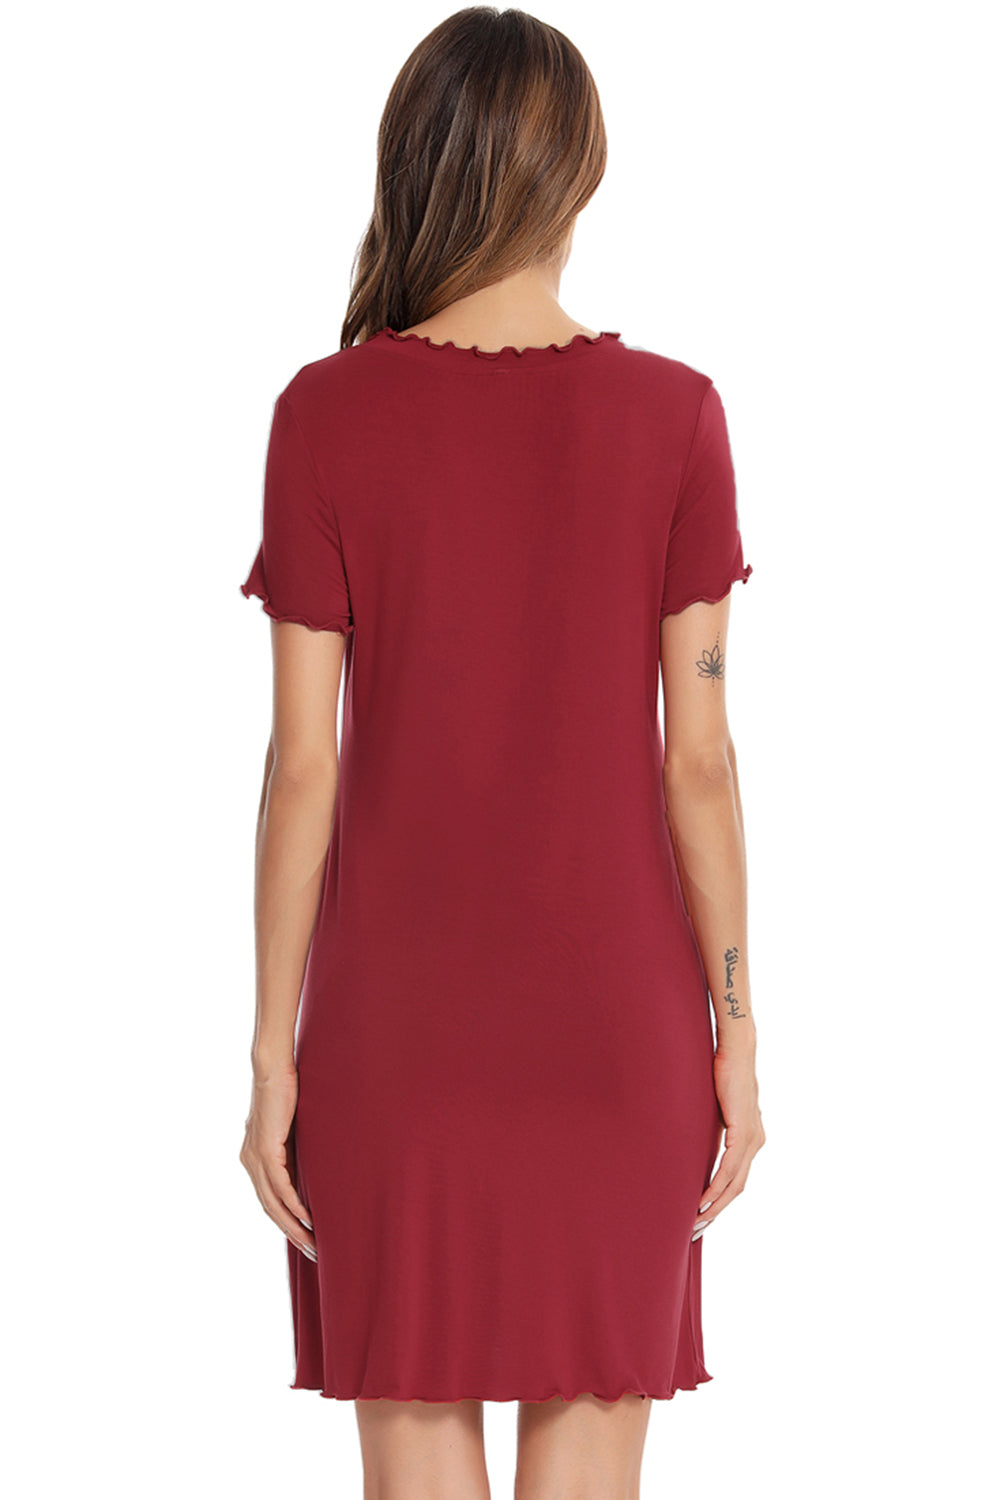 Round Neck Short Sleeve Lounge Dress - Tophatter Deals and Online Shopping - Electronics, Jewelry, Beauty, Health, Gadgets, Fashion - Tophatter's Discounts & Offers - tophatters - tophatters.co